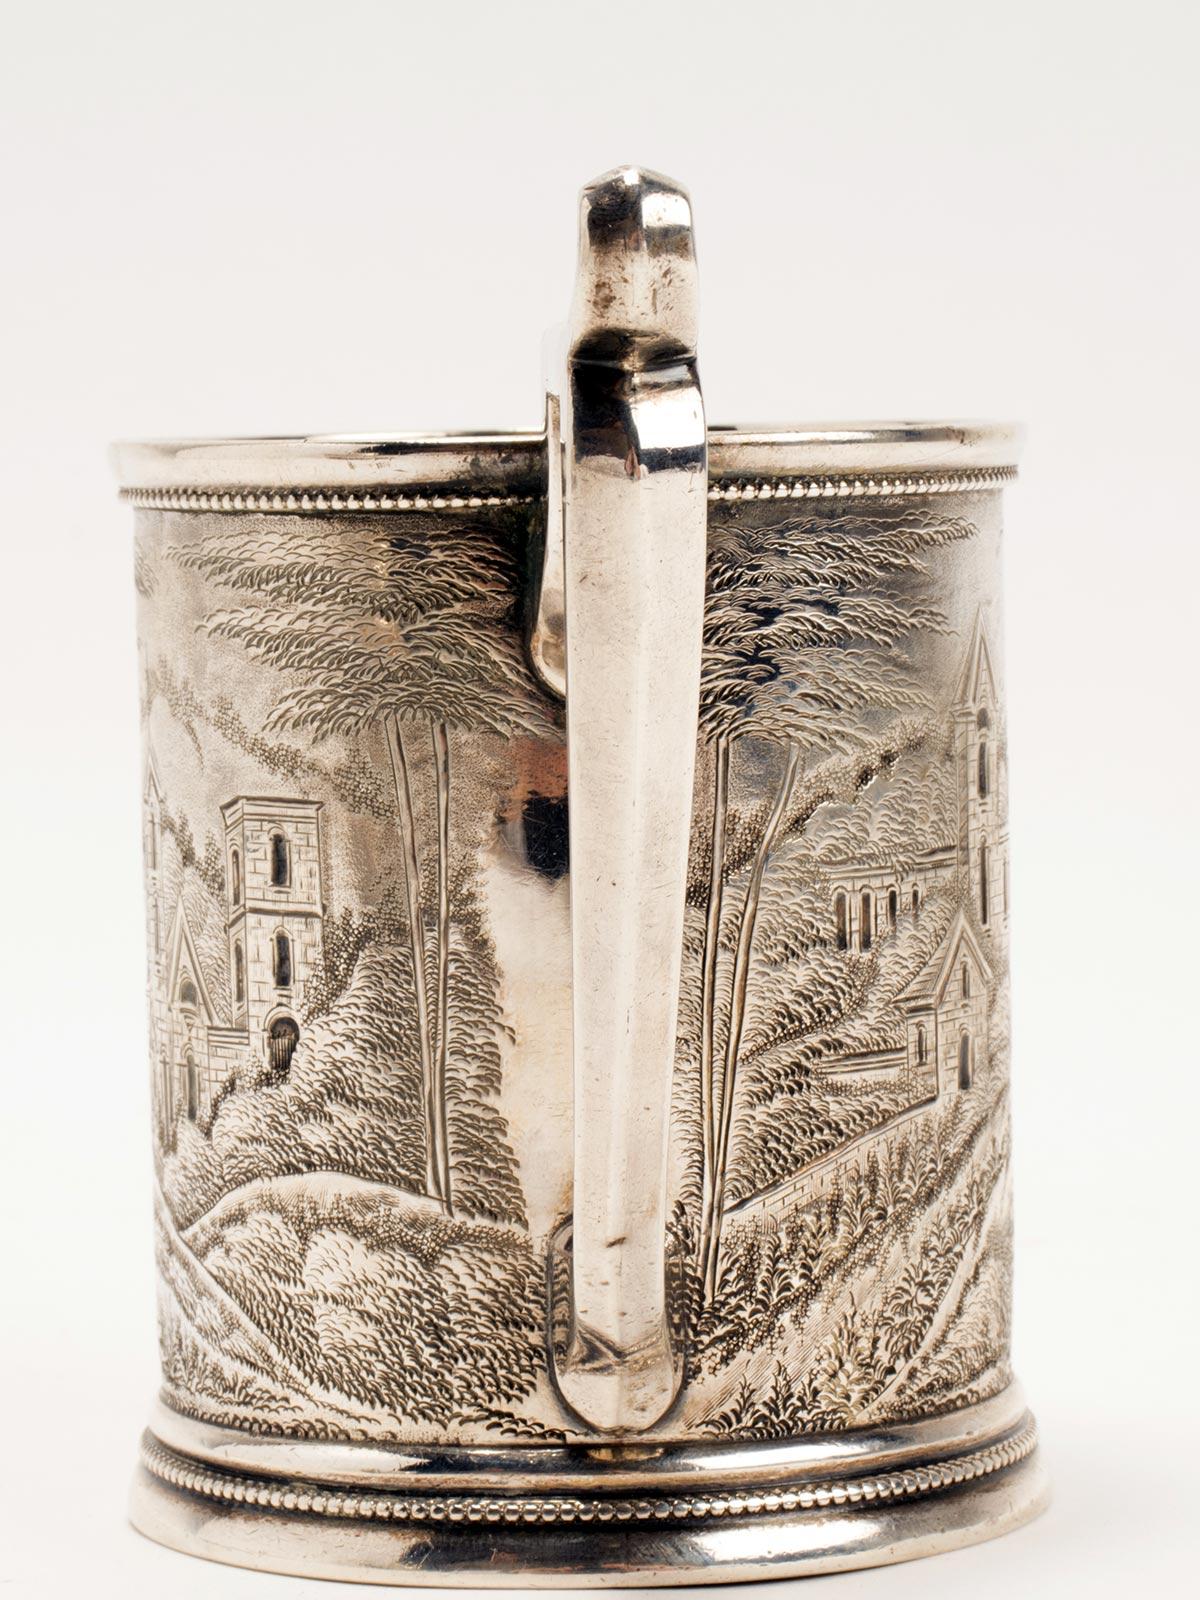 Sterling Silver Mug, Embossed, Depicting Monuments and Architecture, USA, 1890 1